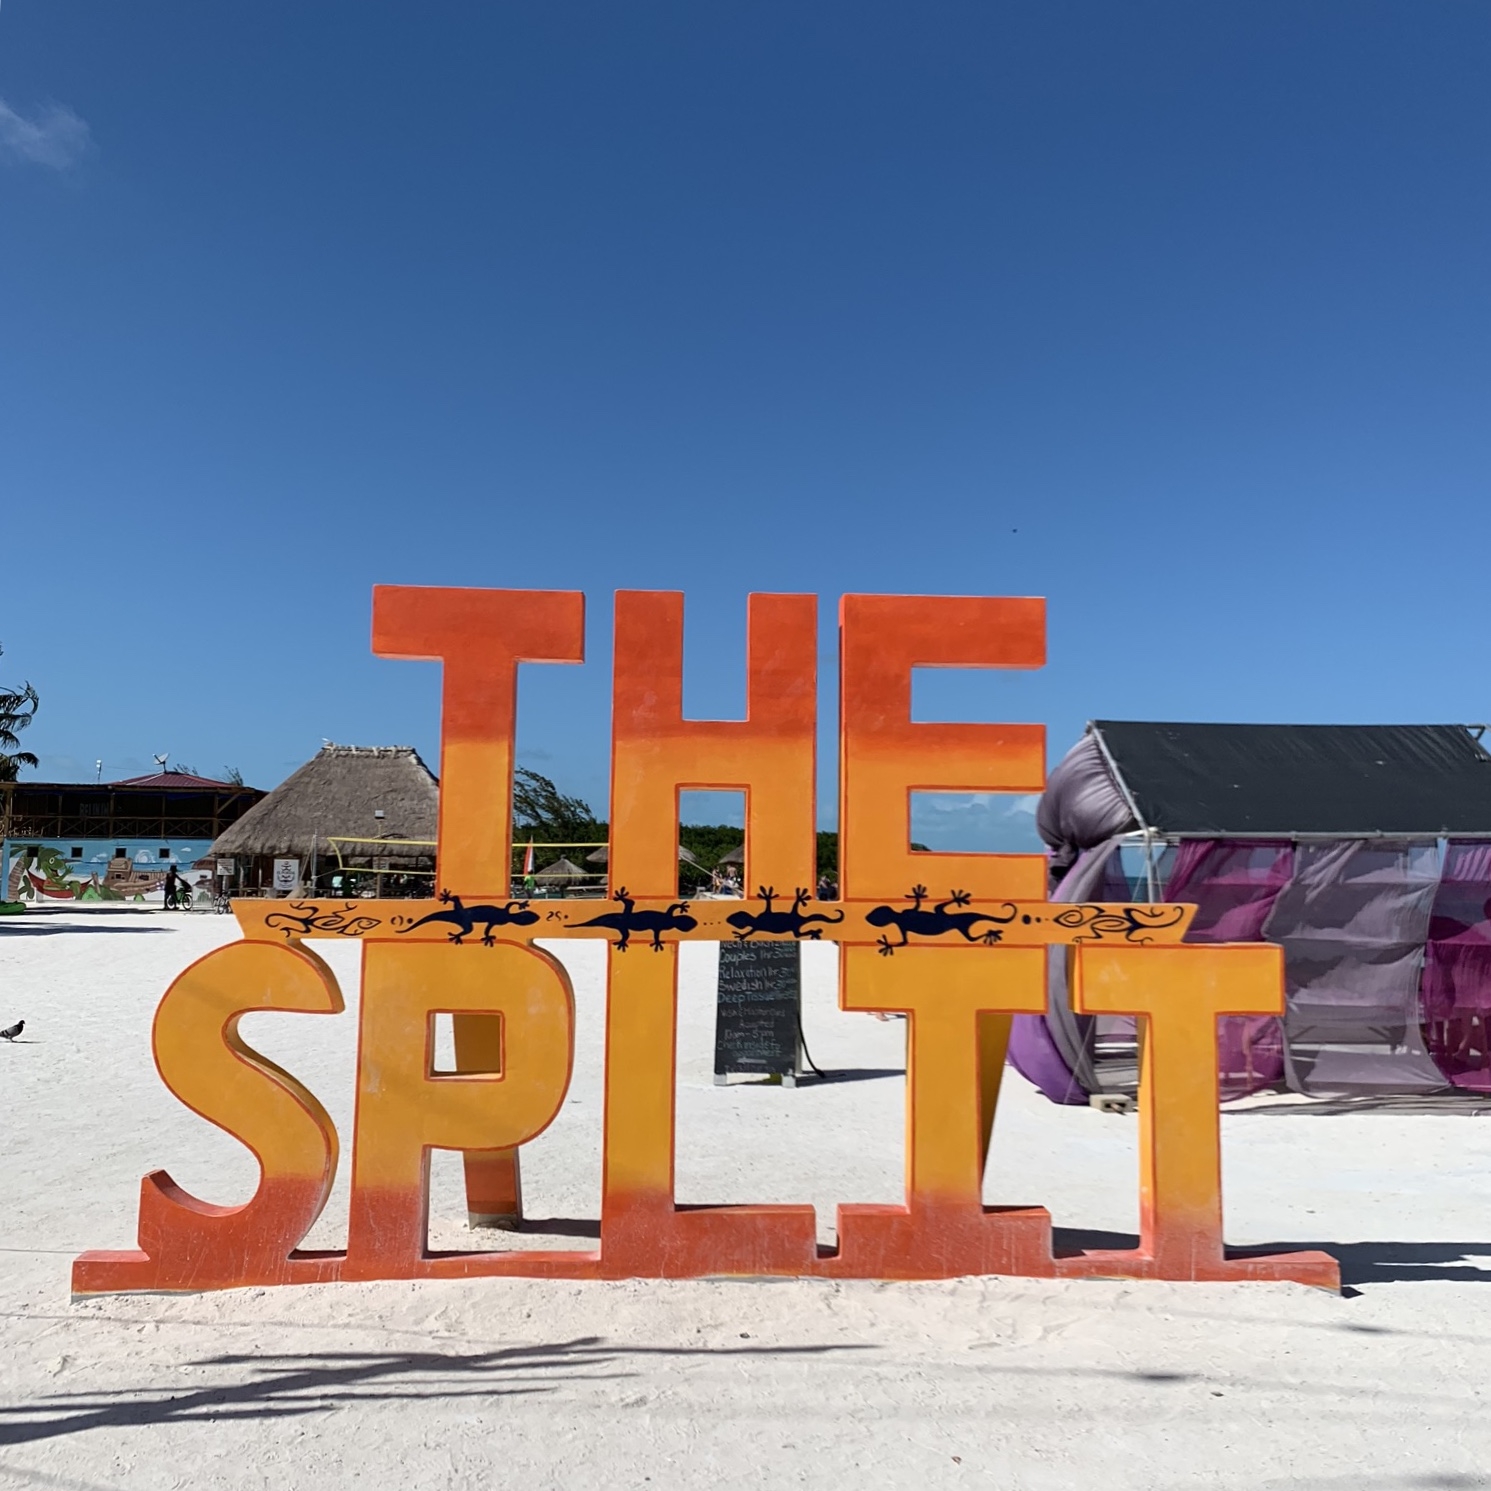 There are endless activities at The Split in Caye Caulker, Belize.